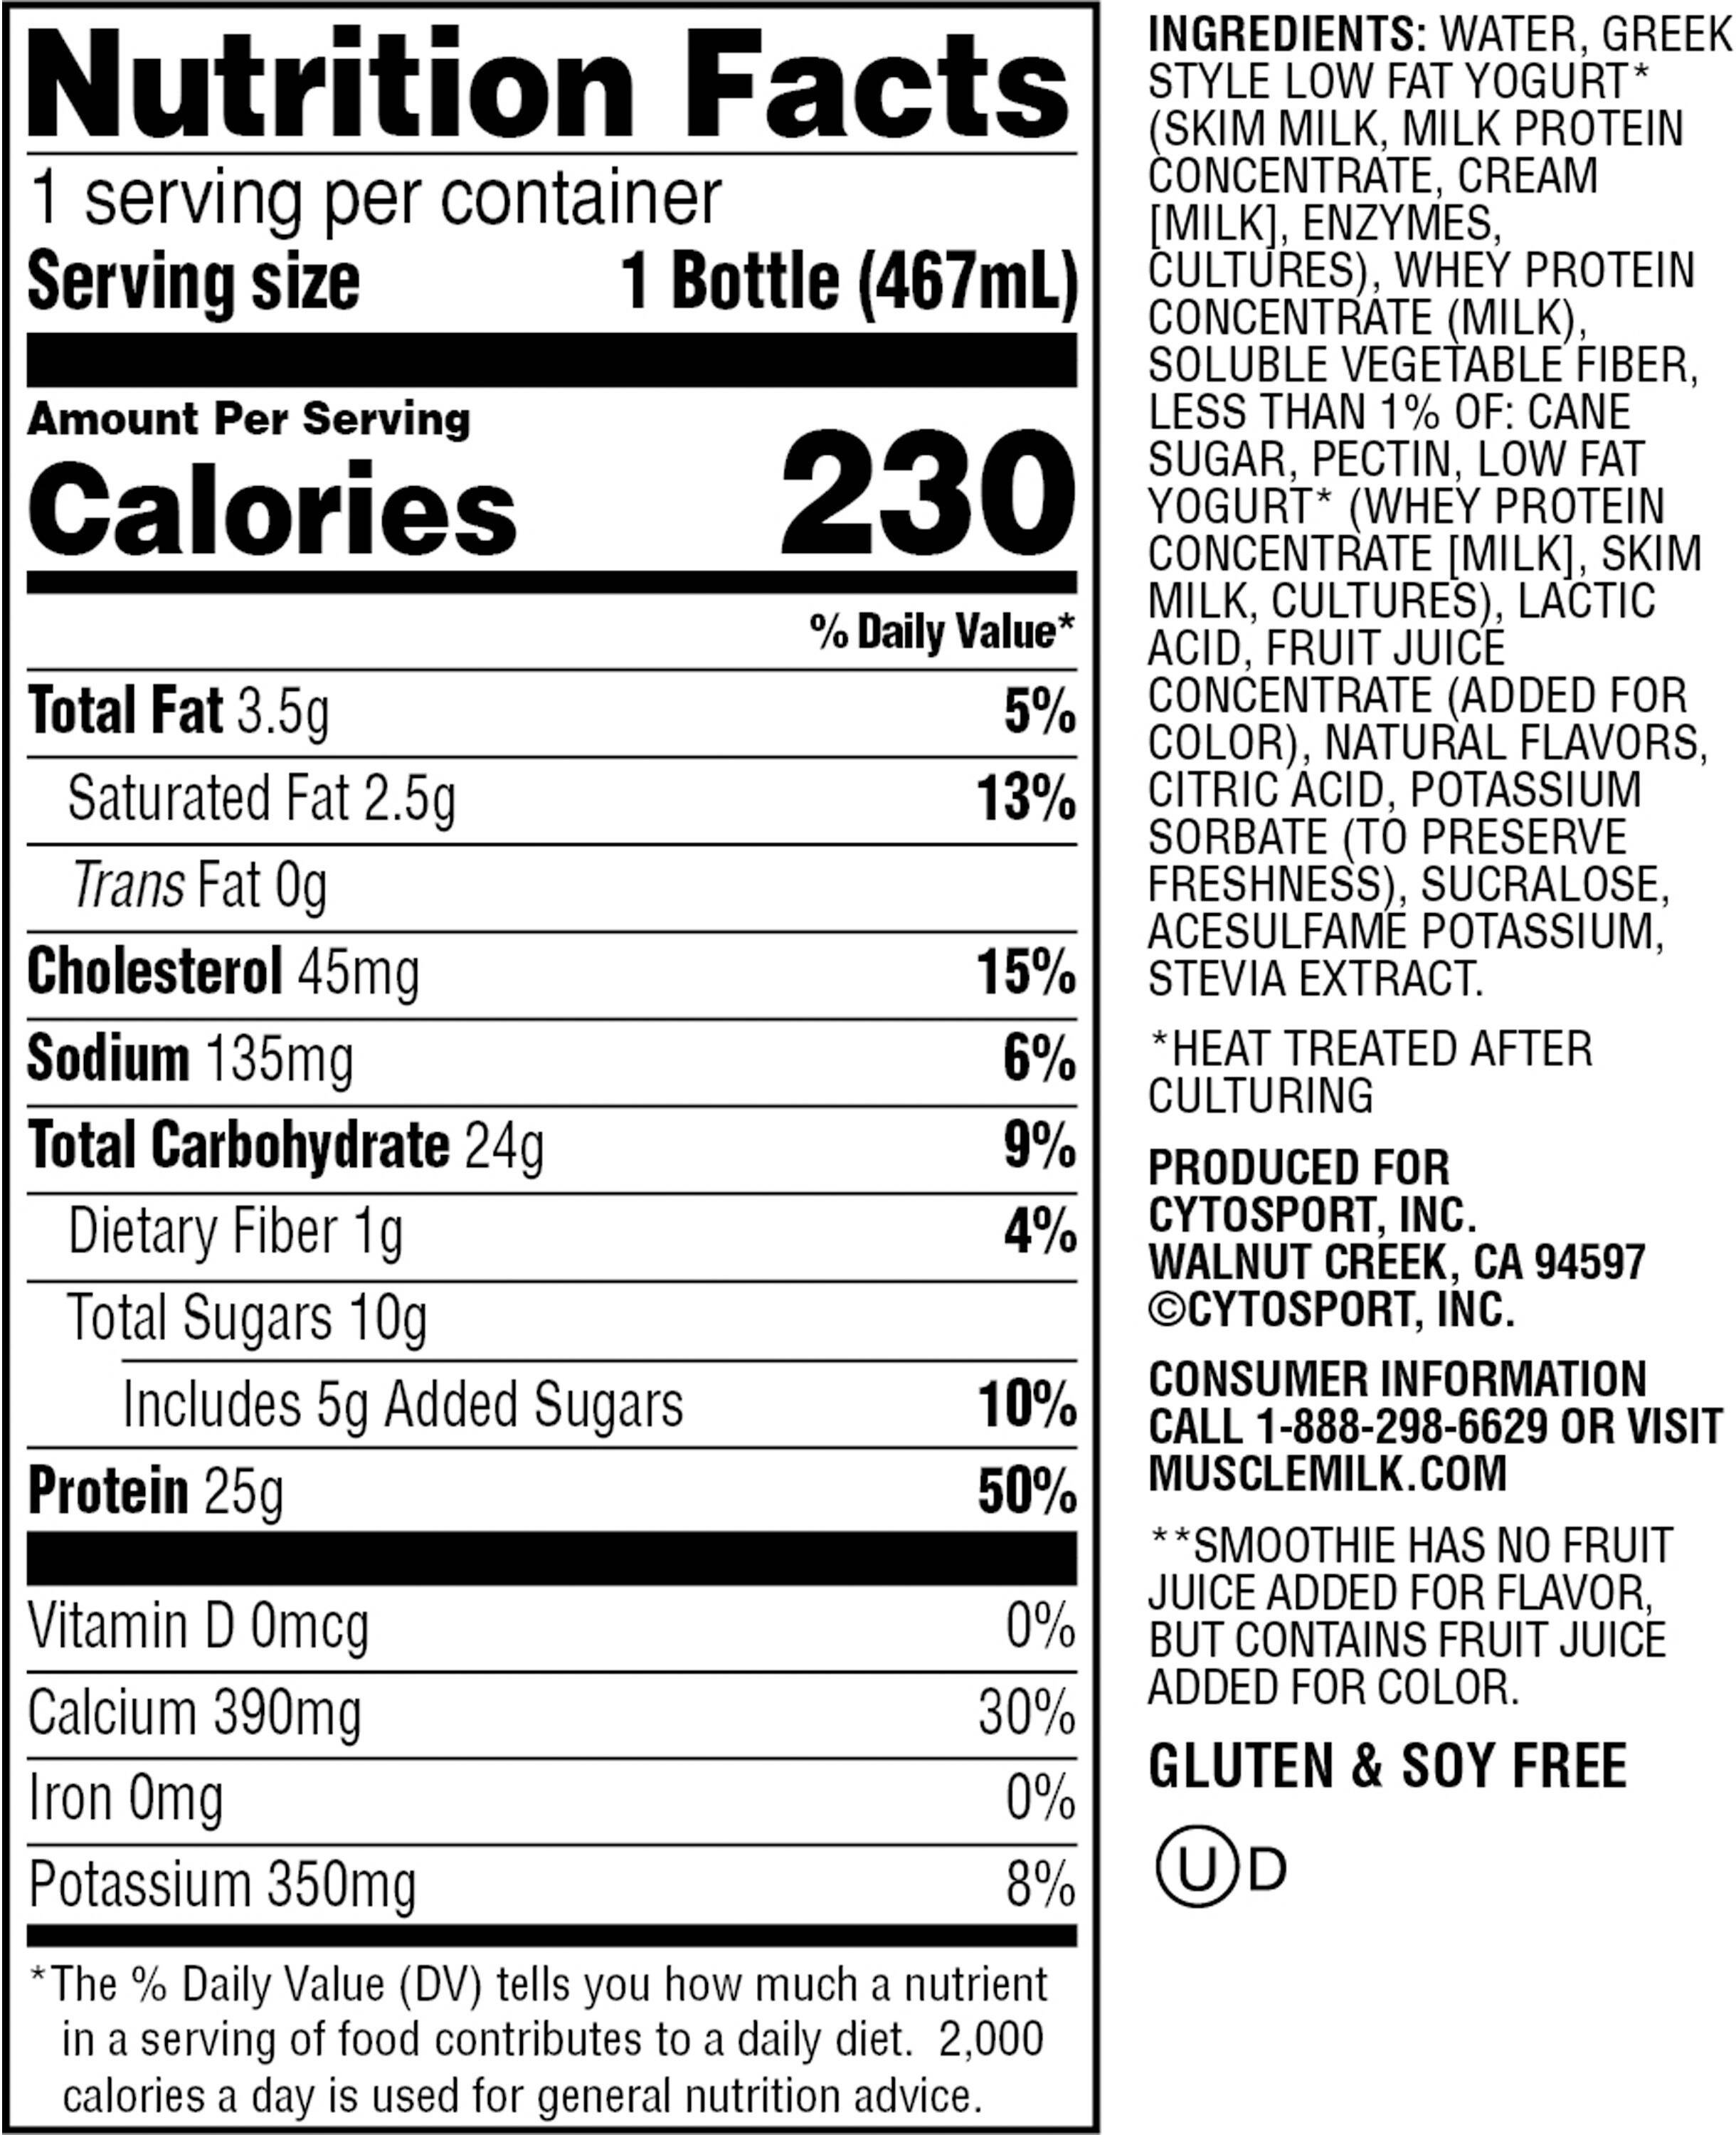 Image describing nutrition information for product Muscle Milk Smoothie Blueberry